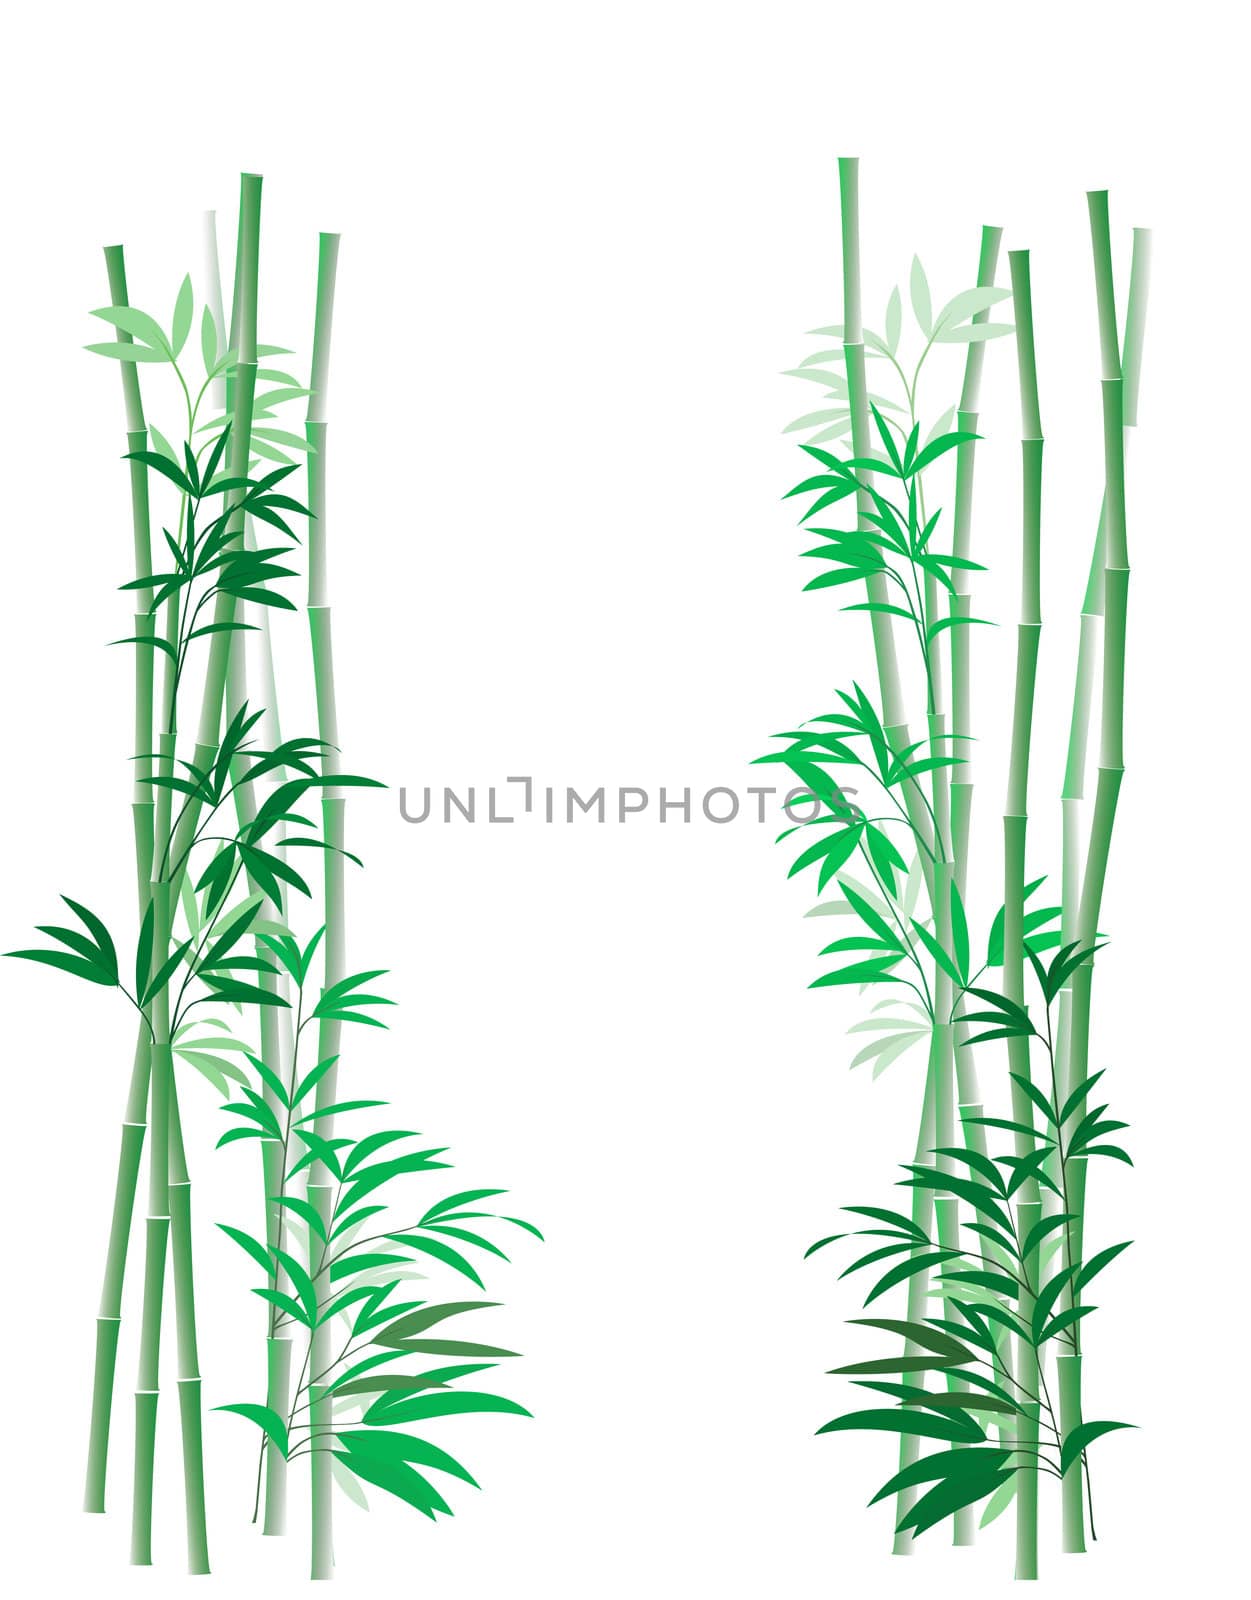 Illustration of green bamboo canes and leaves against a white background